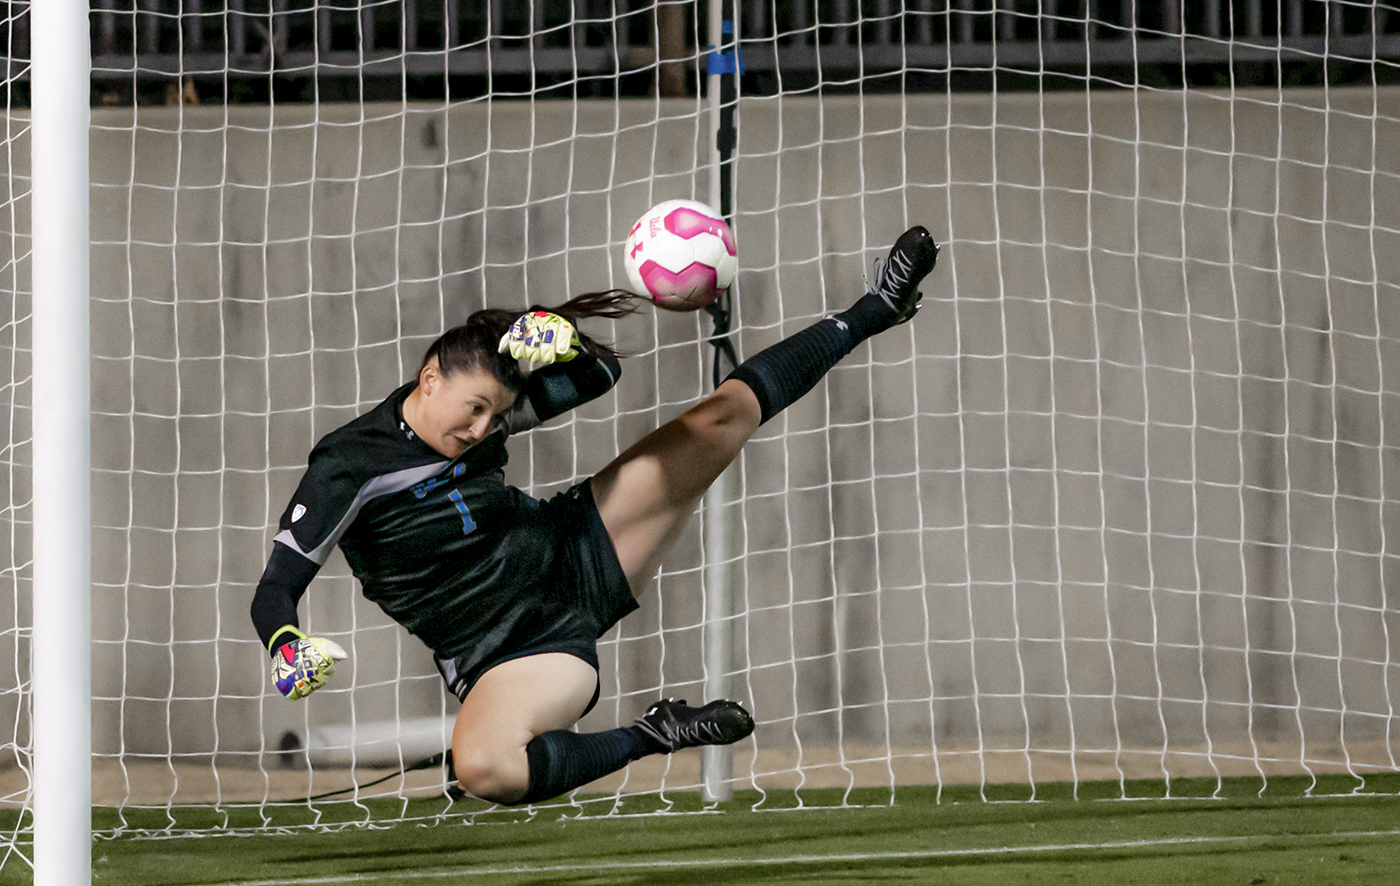 Women’s soccer ties USC in double overtime nonconference matchup